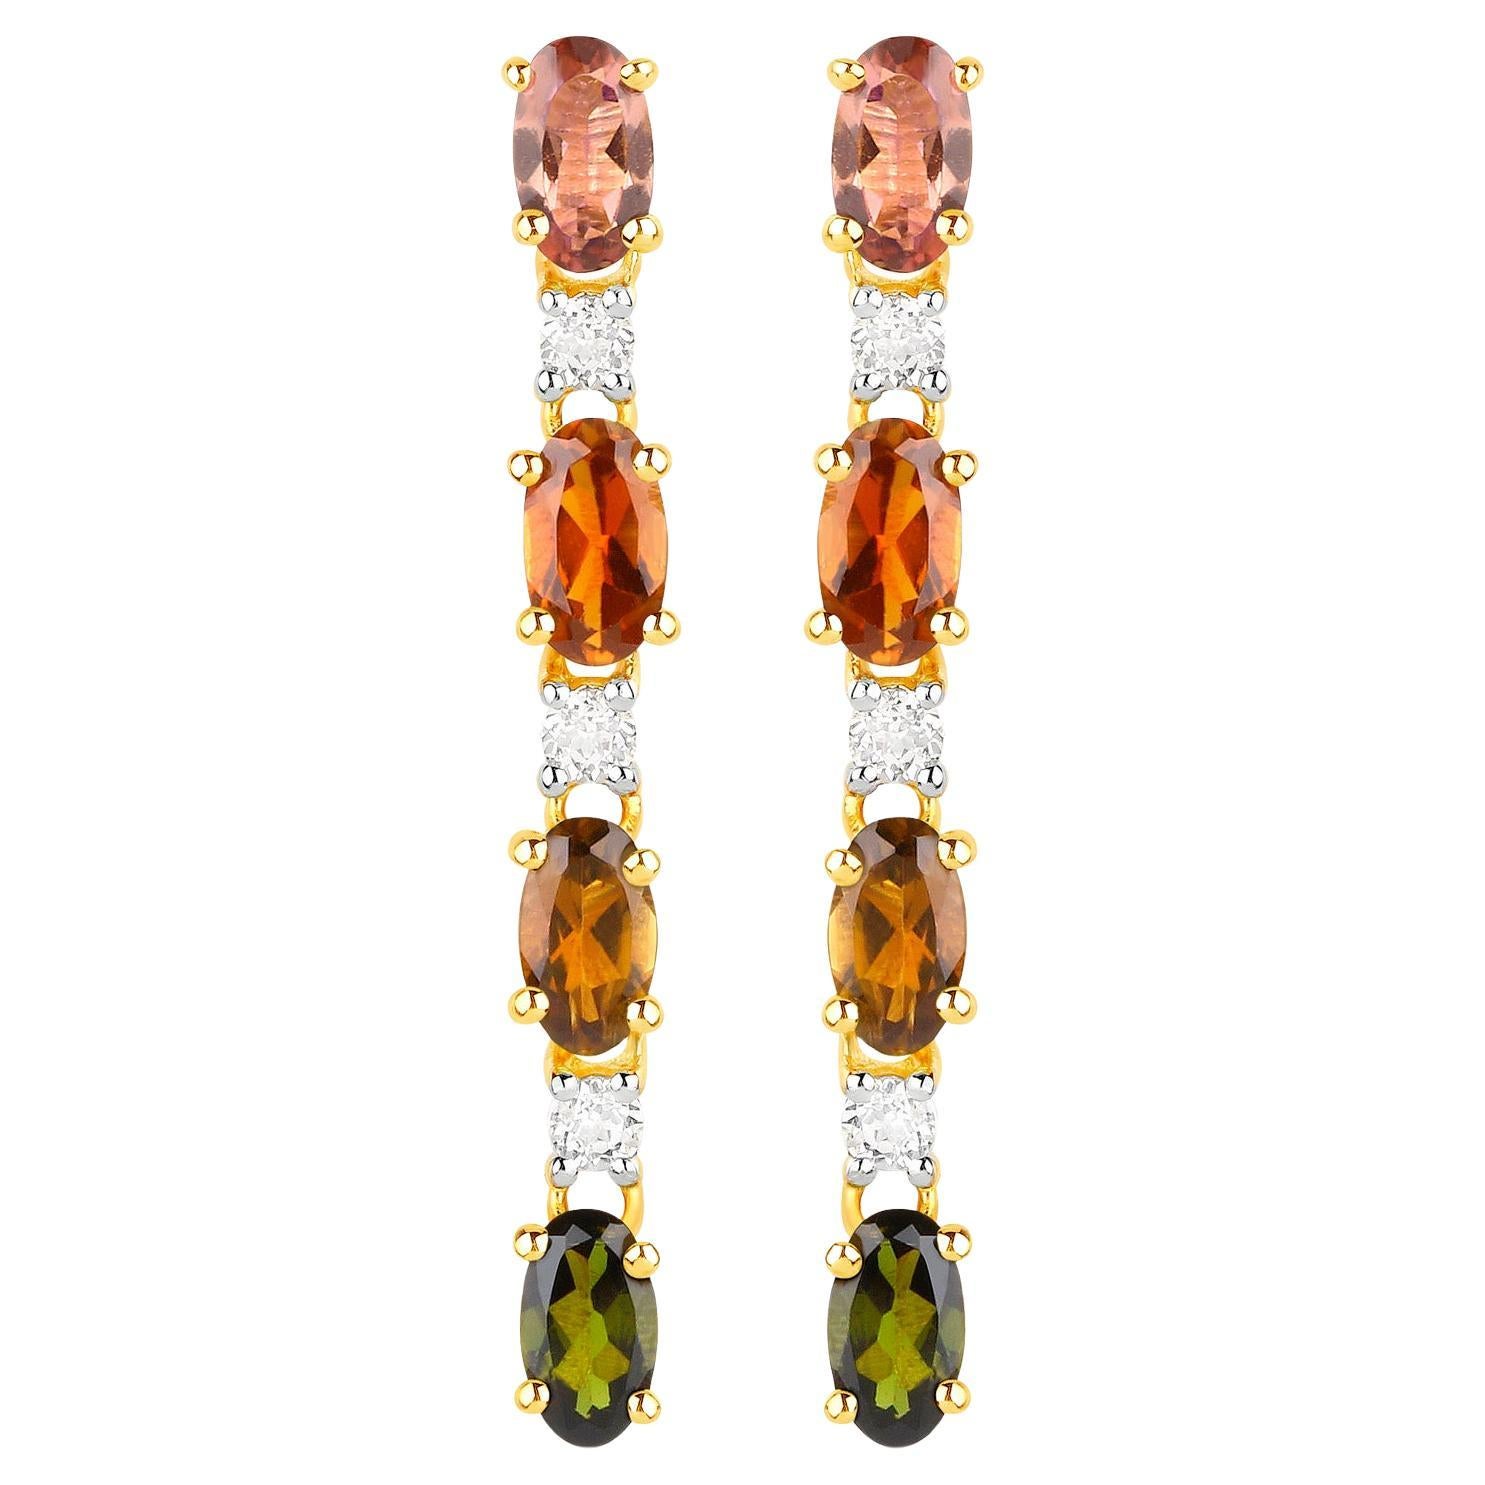 Multicolored Tourmaline Dangle Earrings White Topaz 1.95 Carats 18K Gold Plated